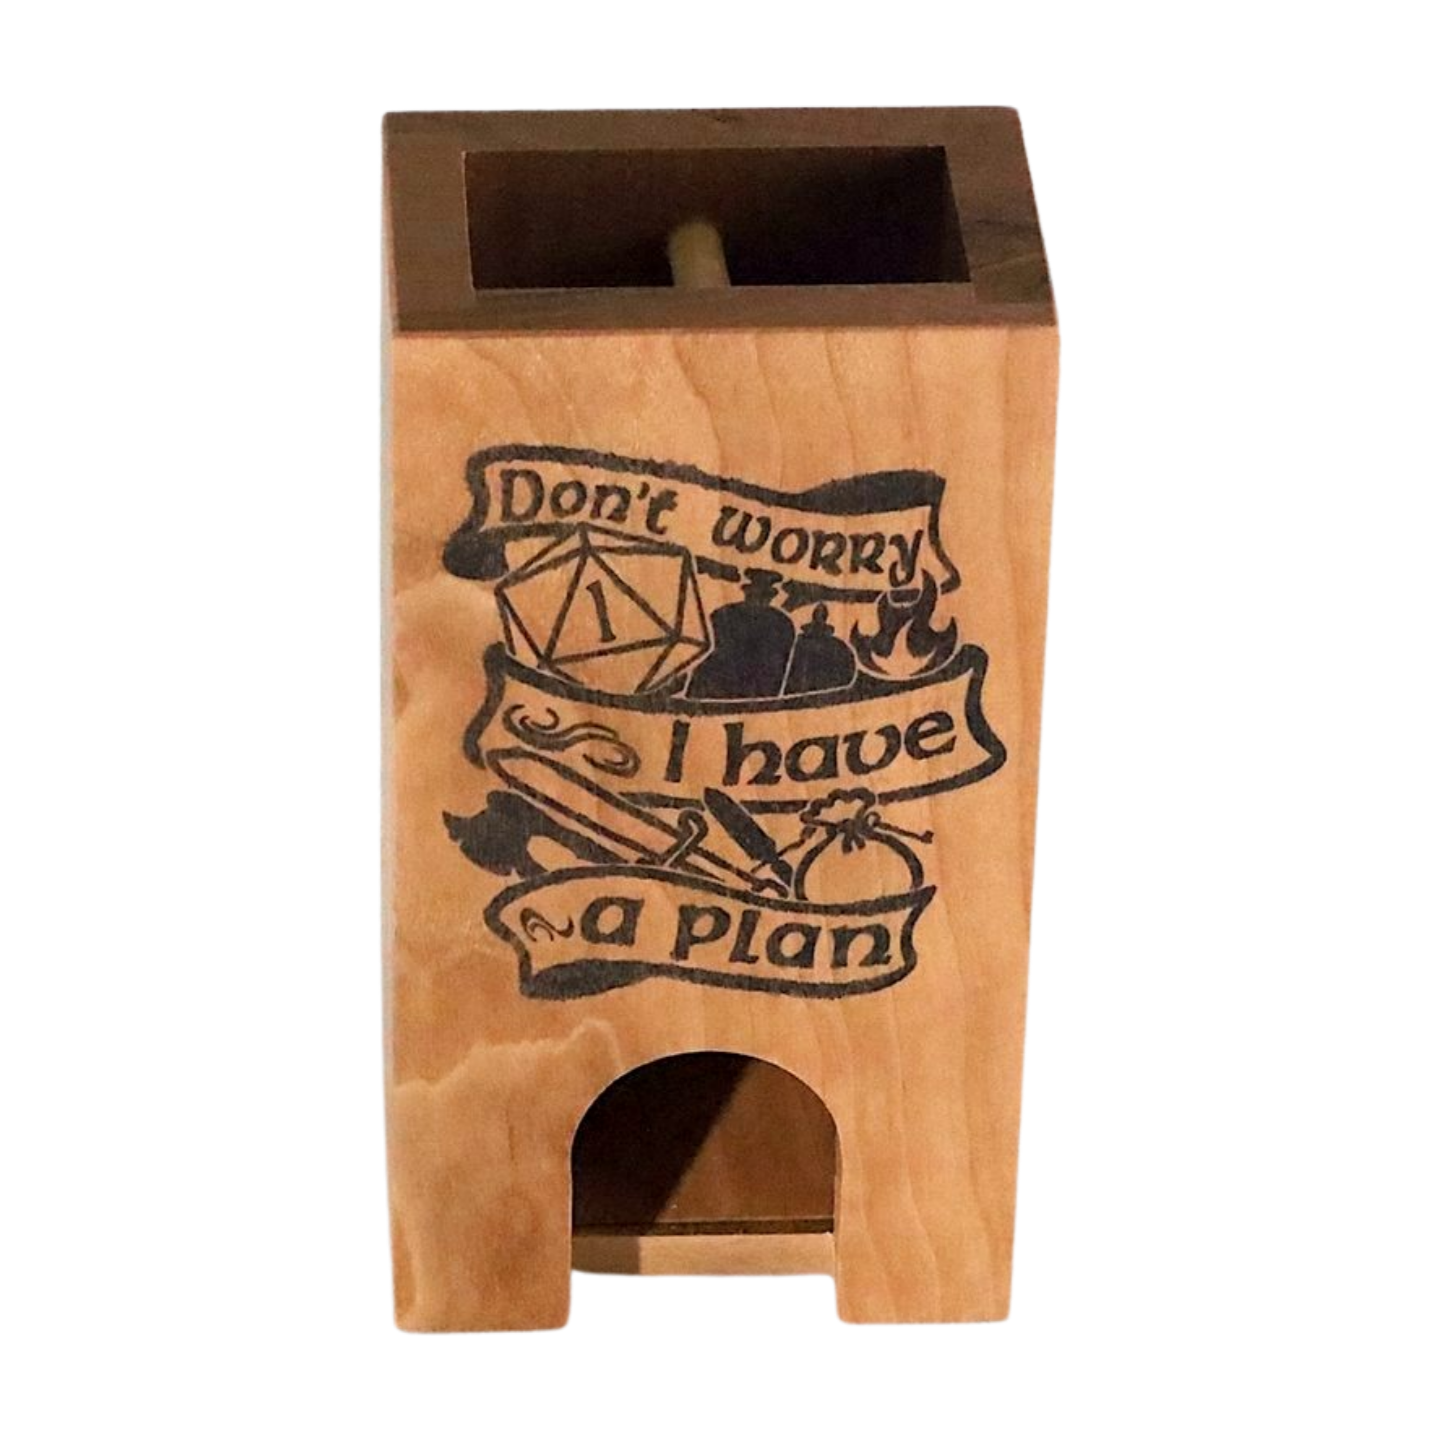 "Don't Worry I have a Plan" DnD Dice Tower Wood for Pathfinder, Shadowrun, TTRPG, D20 Dice Roller Gaming Setup, Dungeon Master Gift for Son - Dragon Armor Games